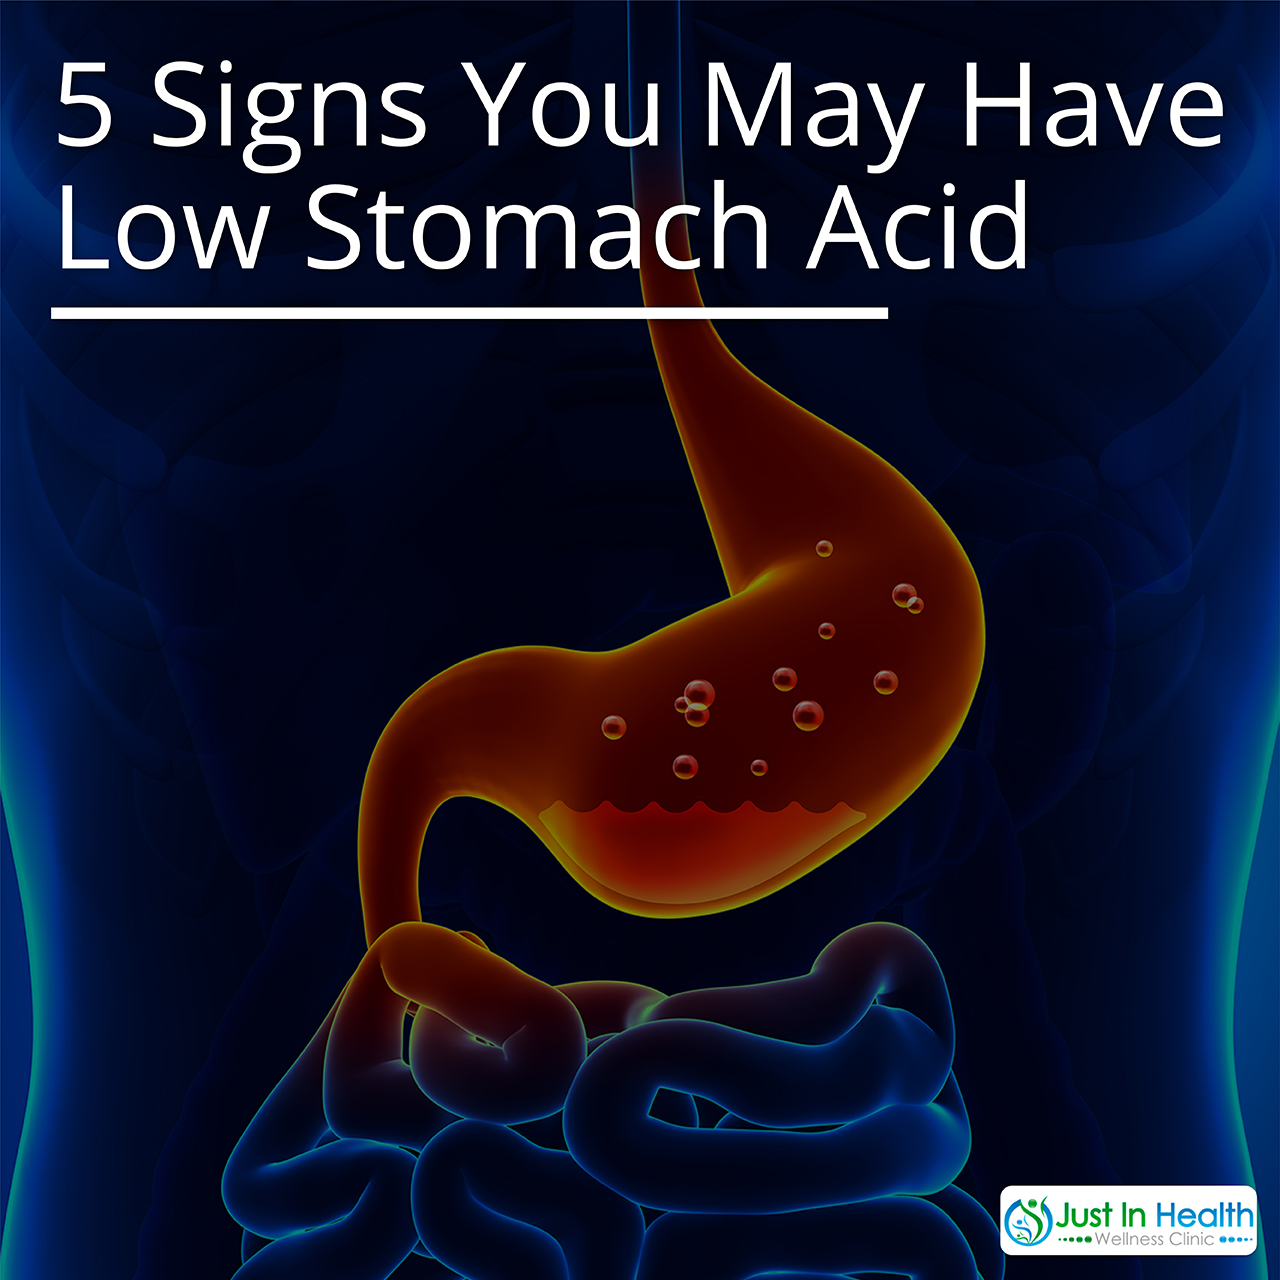 5 Signs You May Have Low Stomach Acid